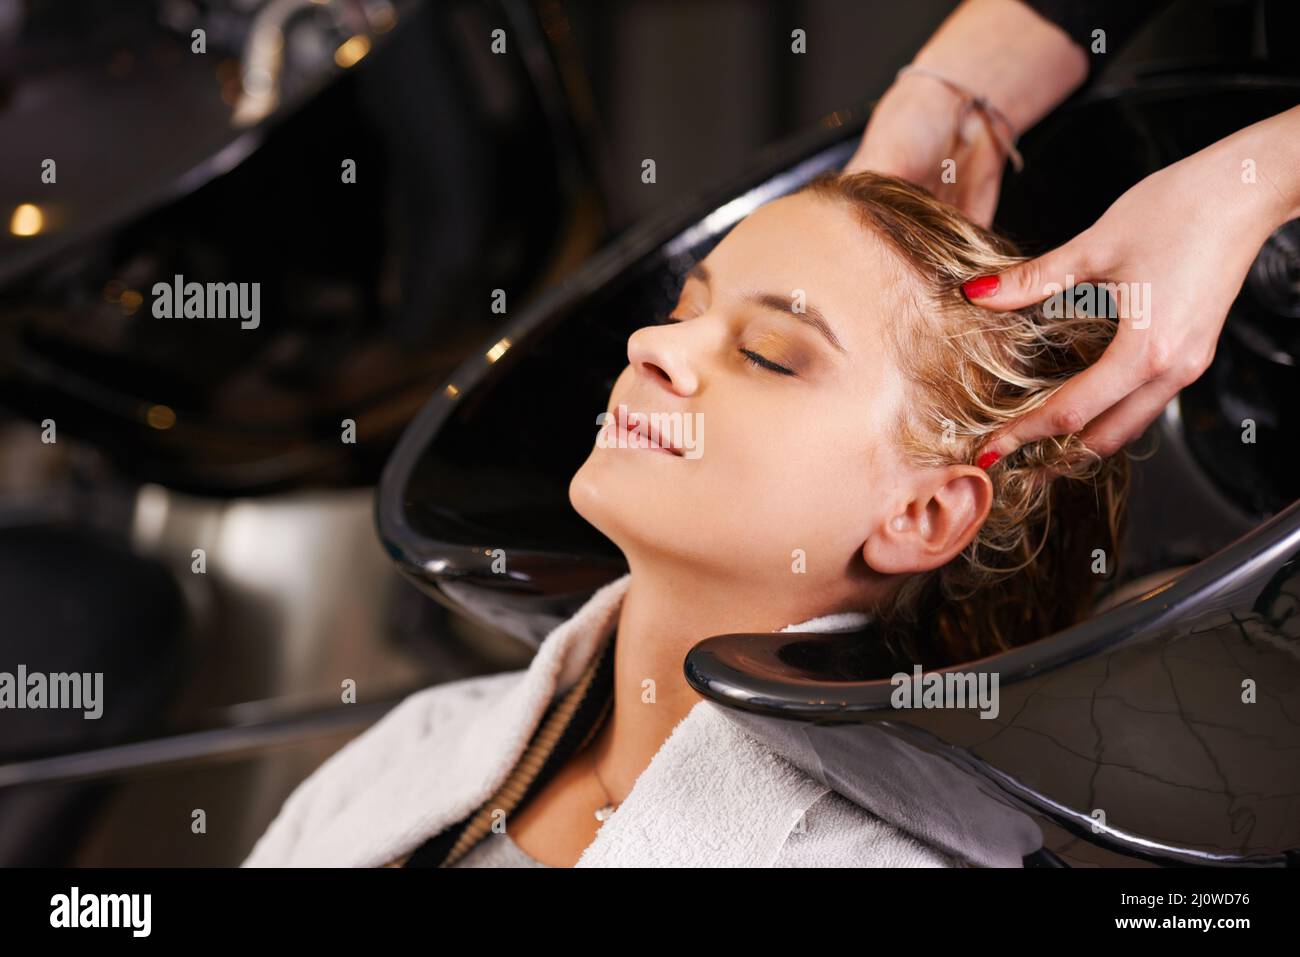 Relaxing at the salon. Shot of a young woman having her hair washed at a hair salon. Stock Photo